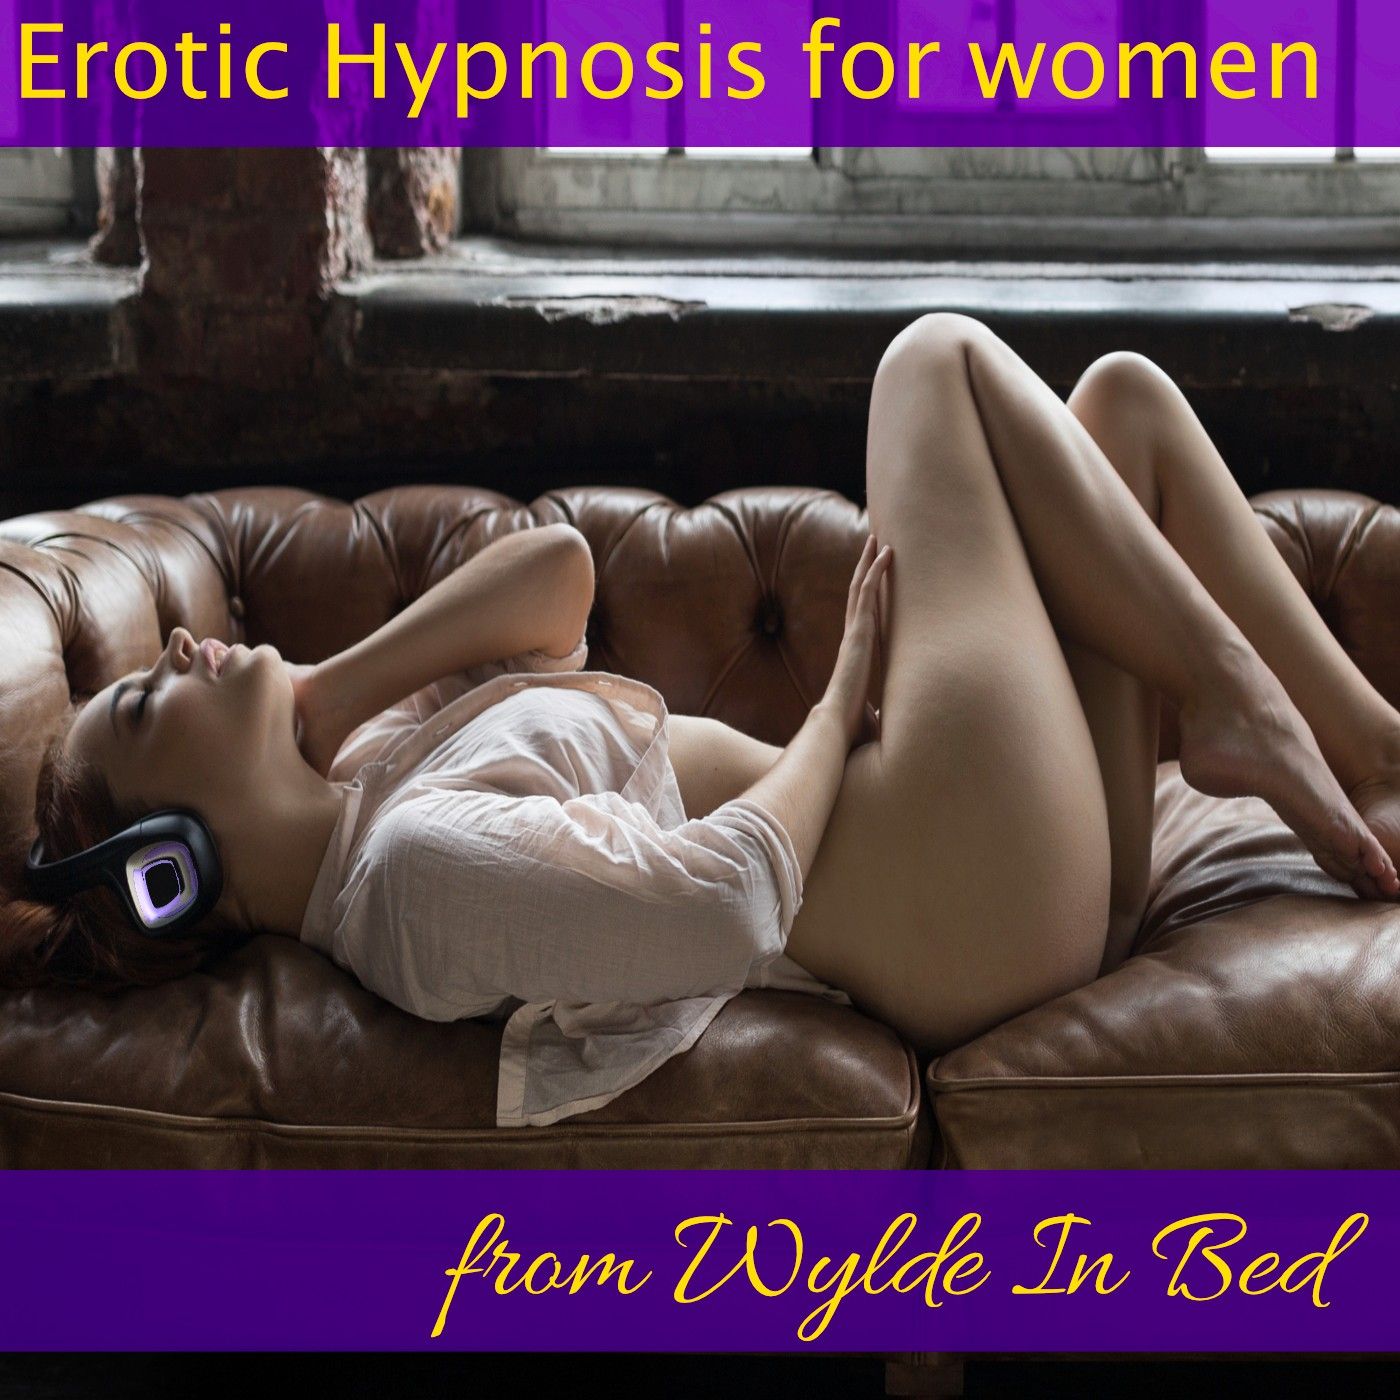 Erotic Hypnosis for Women from Wylde In